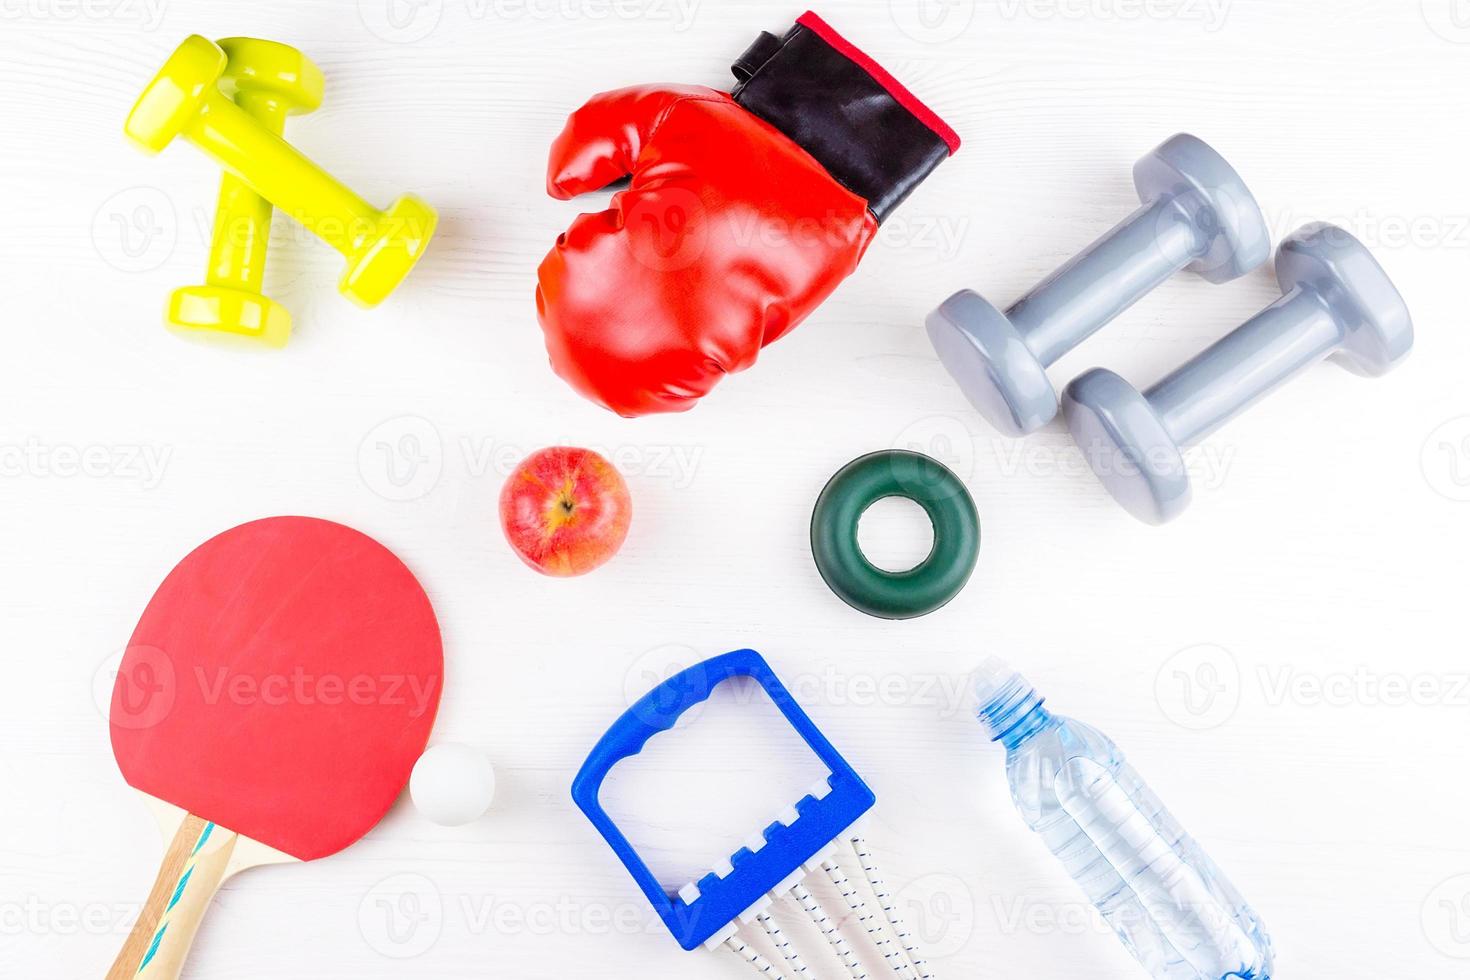 sports equipment for fitness photo